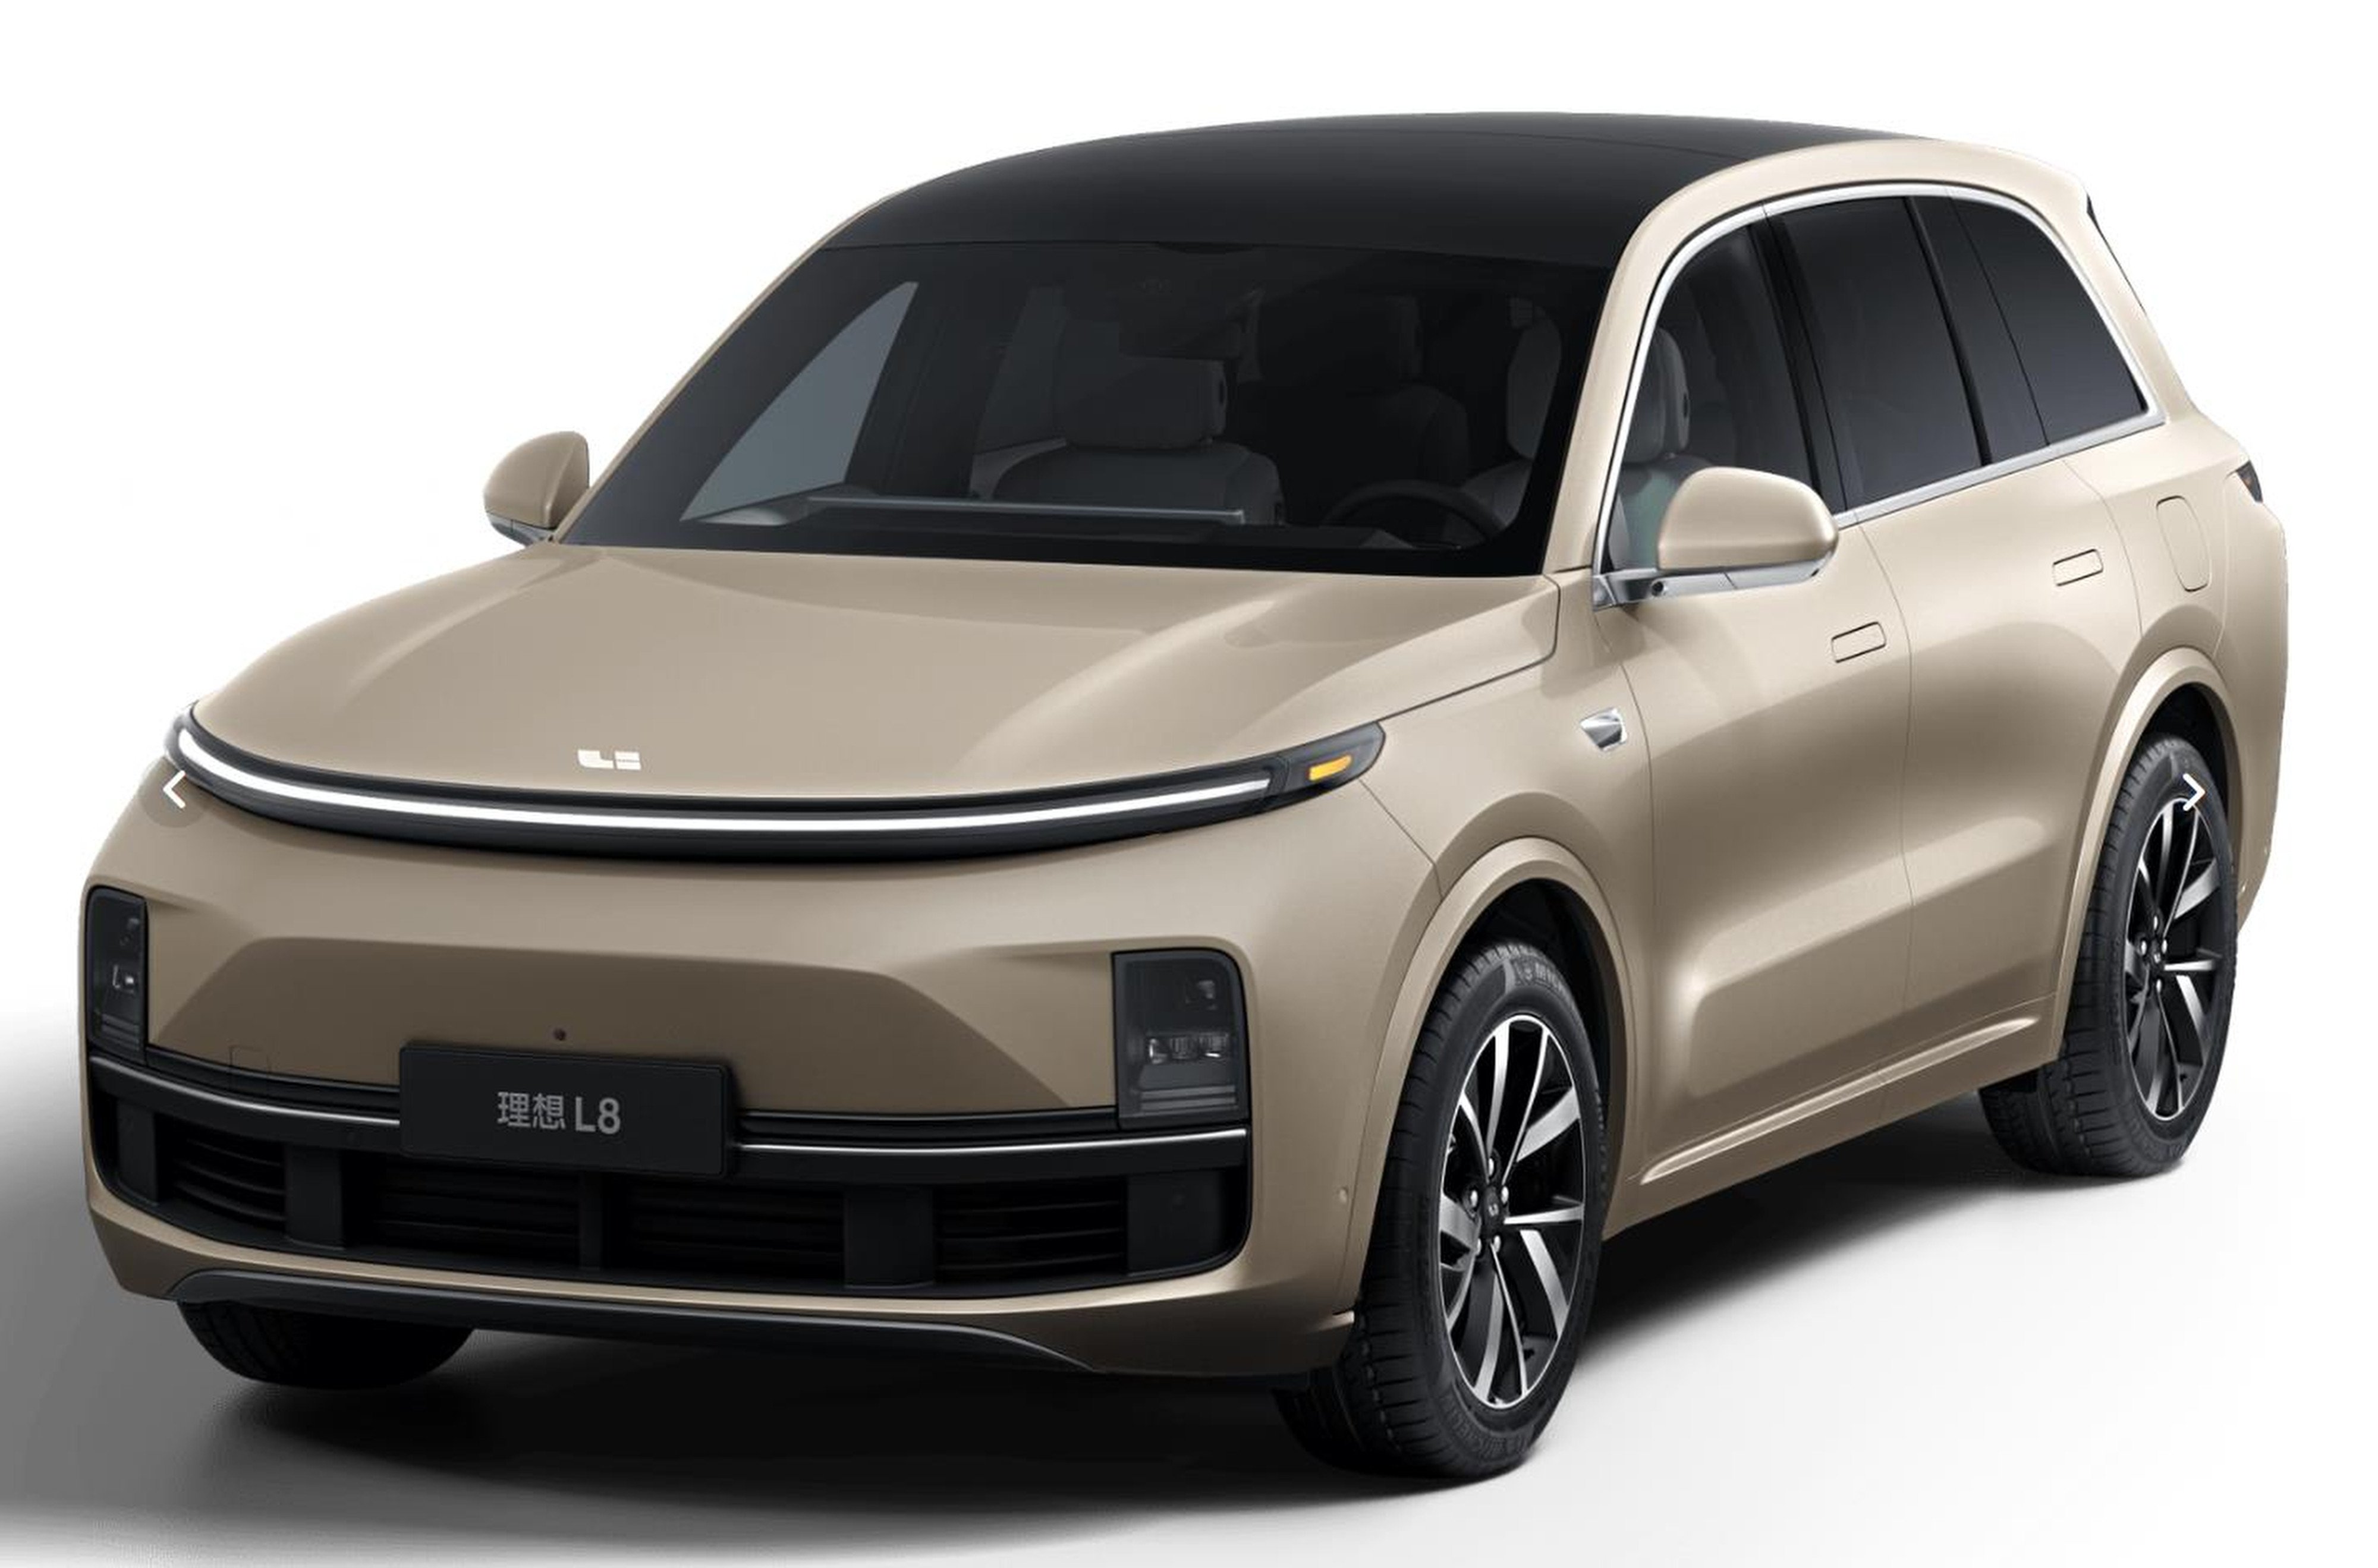 Chinese EV start-up Li Auto launches L8 SUV aimed squarely at German rivals  BMW, Audi and Mercedes-Benz